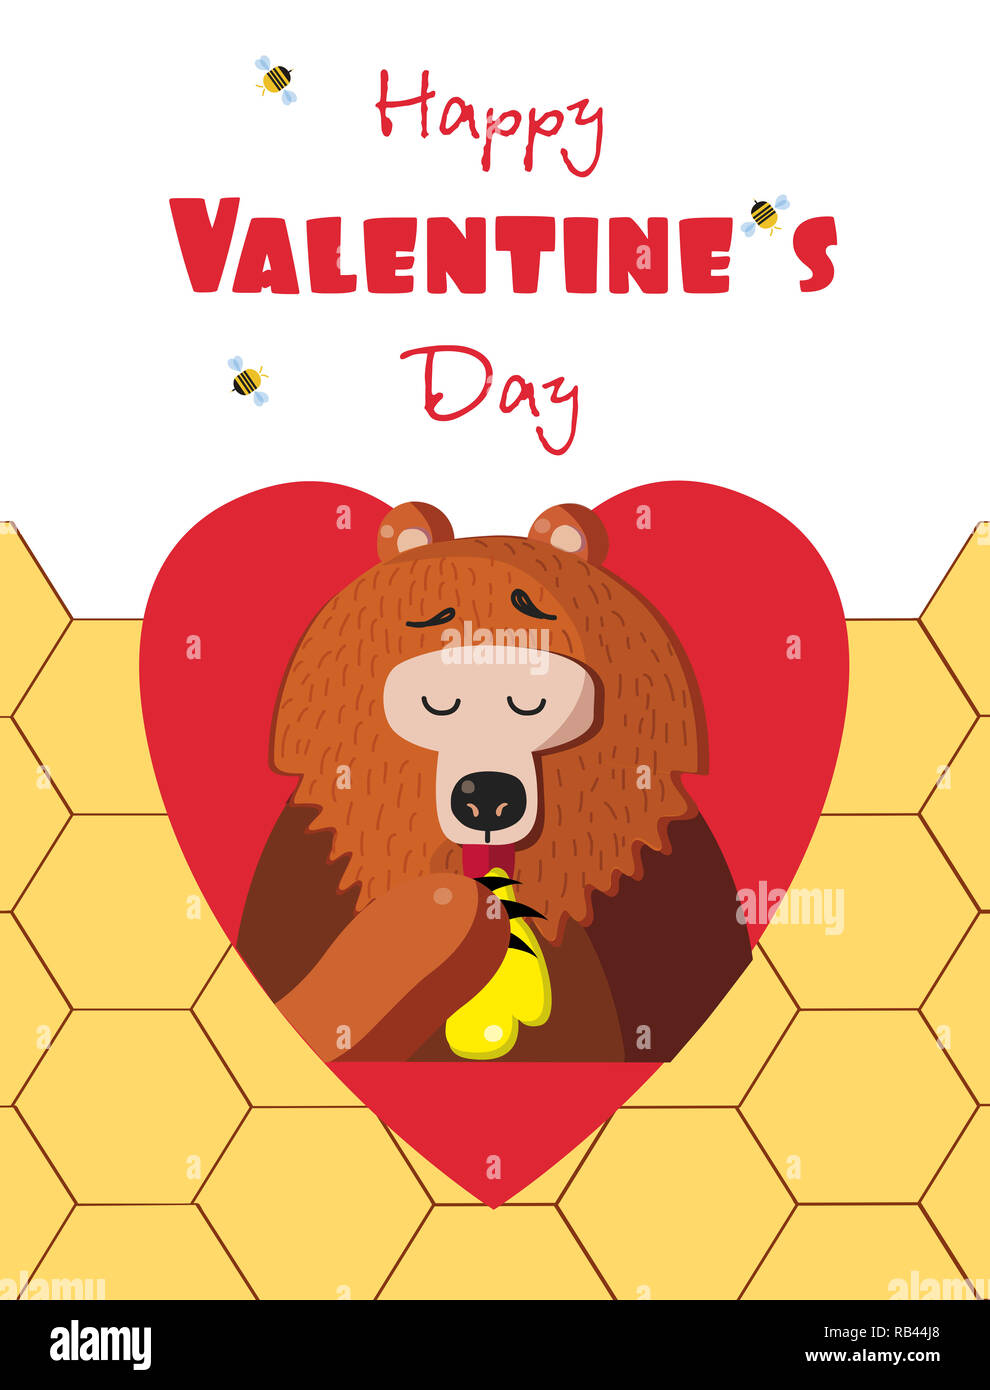 Happy valentines day greeting card of cute cartoon bear  illustration character eating honey inside of red heart and bees around on honeycomb backgrou Stock Photo